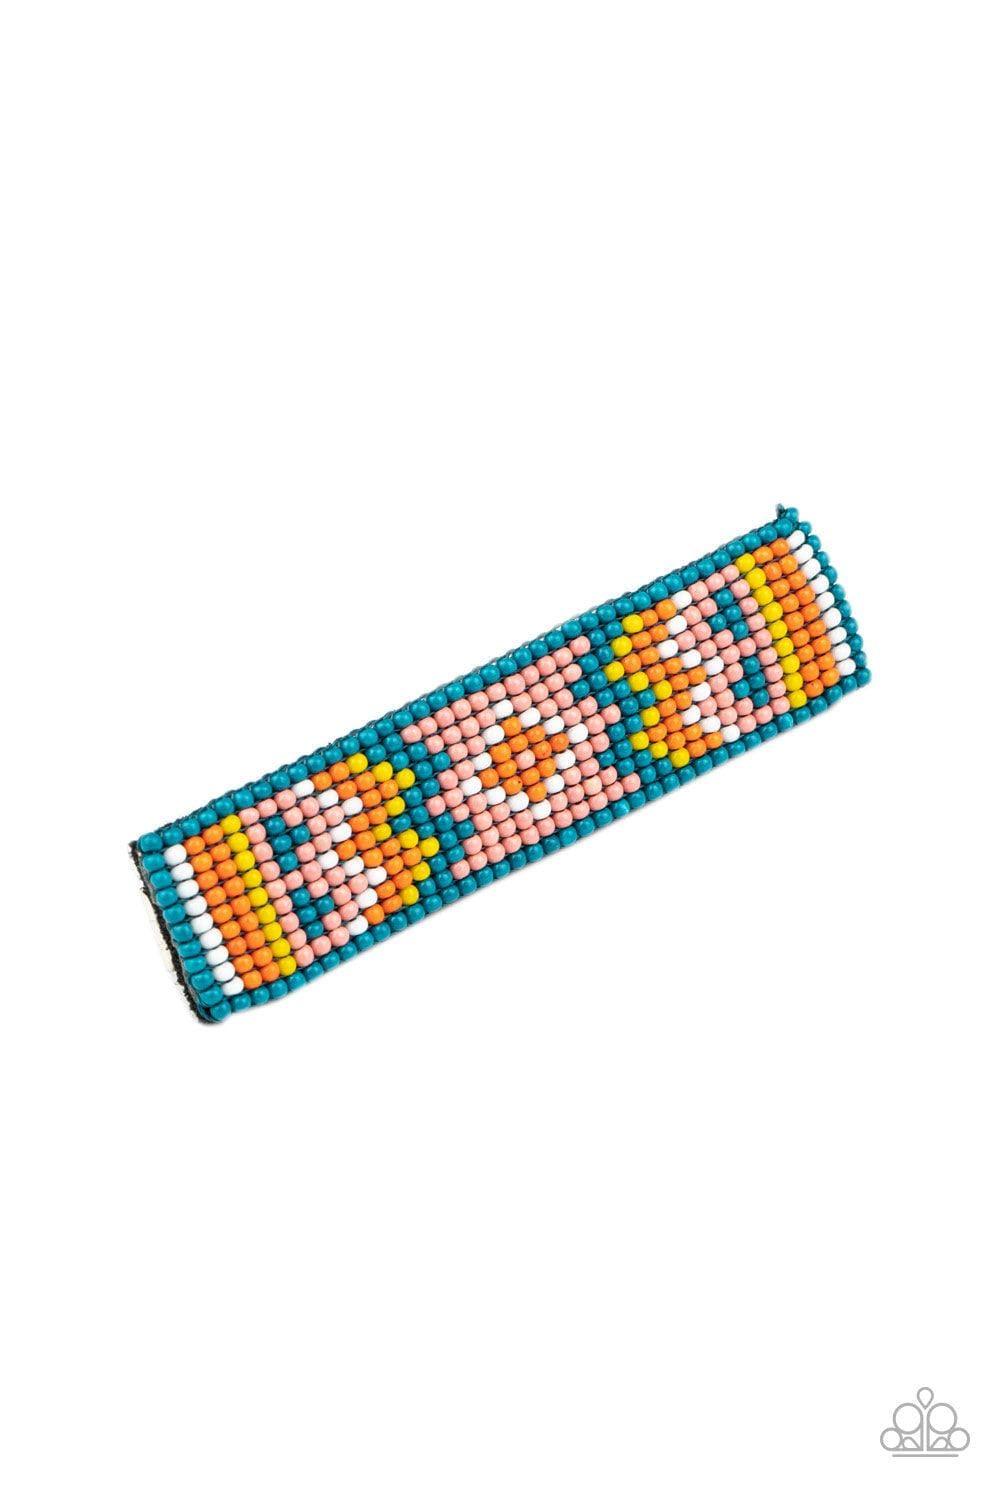 Paparazzi Accessories - Lay Of The Desert - Multicolor Hair Clip - Bling by JessieK